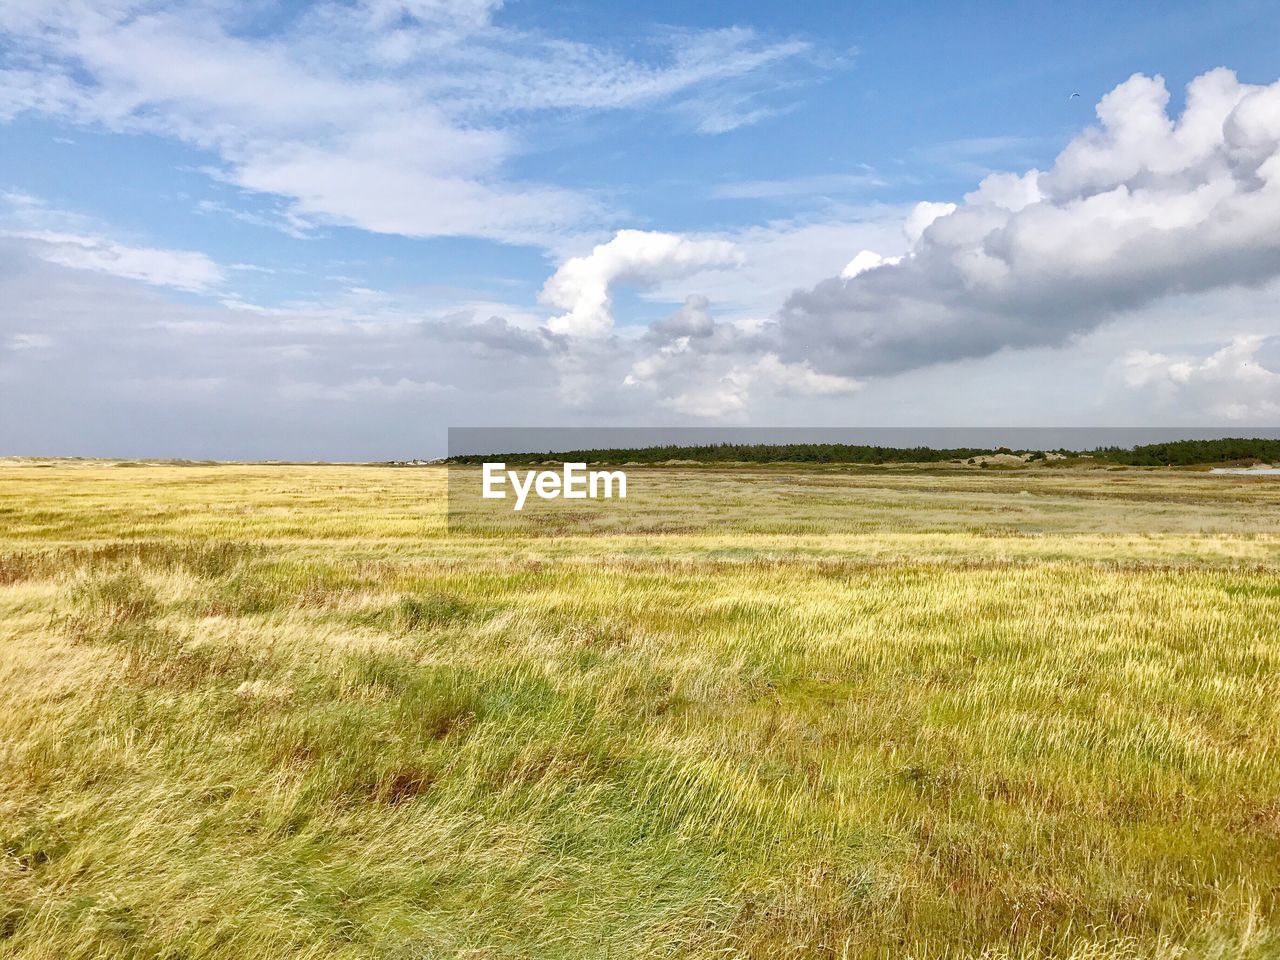 Scenic view of fields against cloudy sky